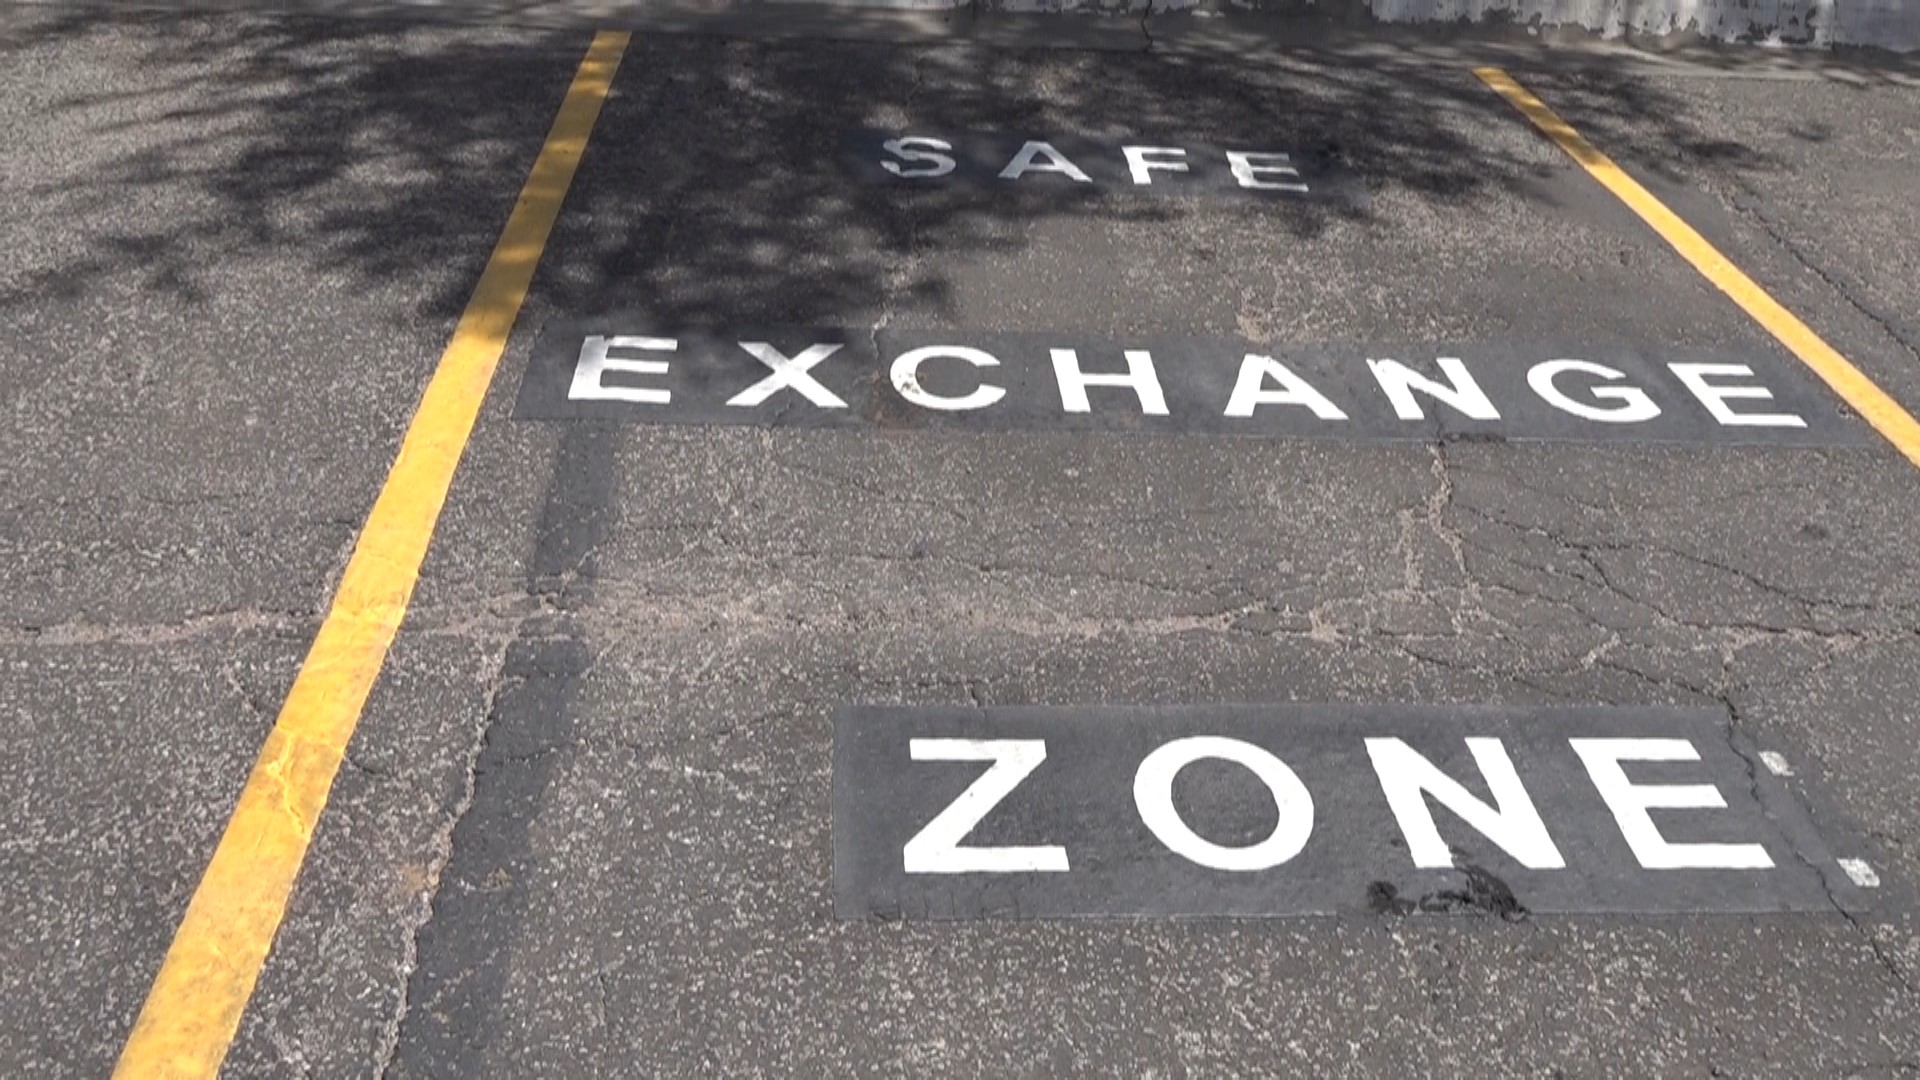 According to MPD, on average, they receive three calls a day about someone getting scammed. They encourage using safe exchange zones in the city.